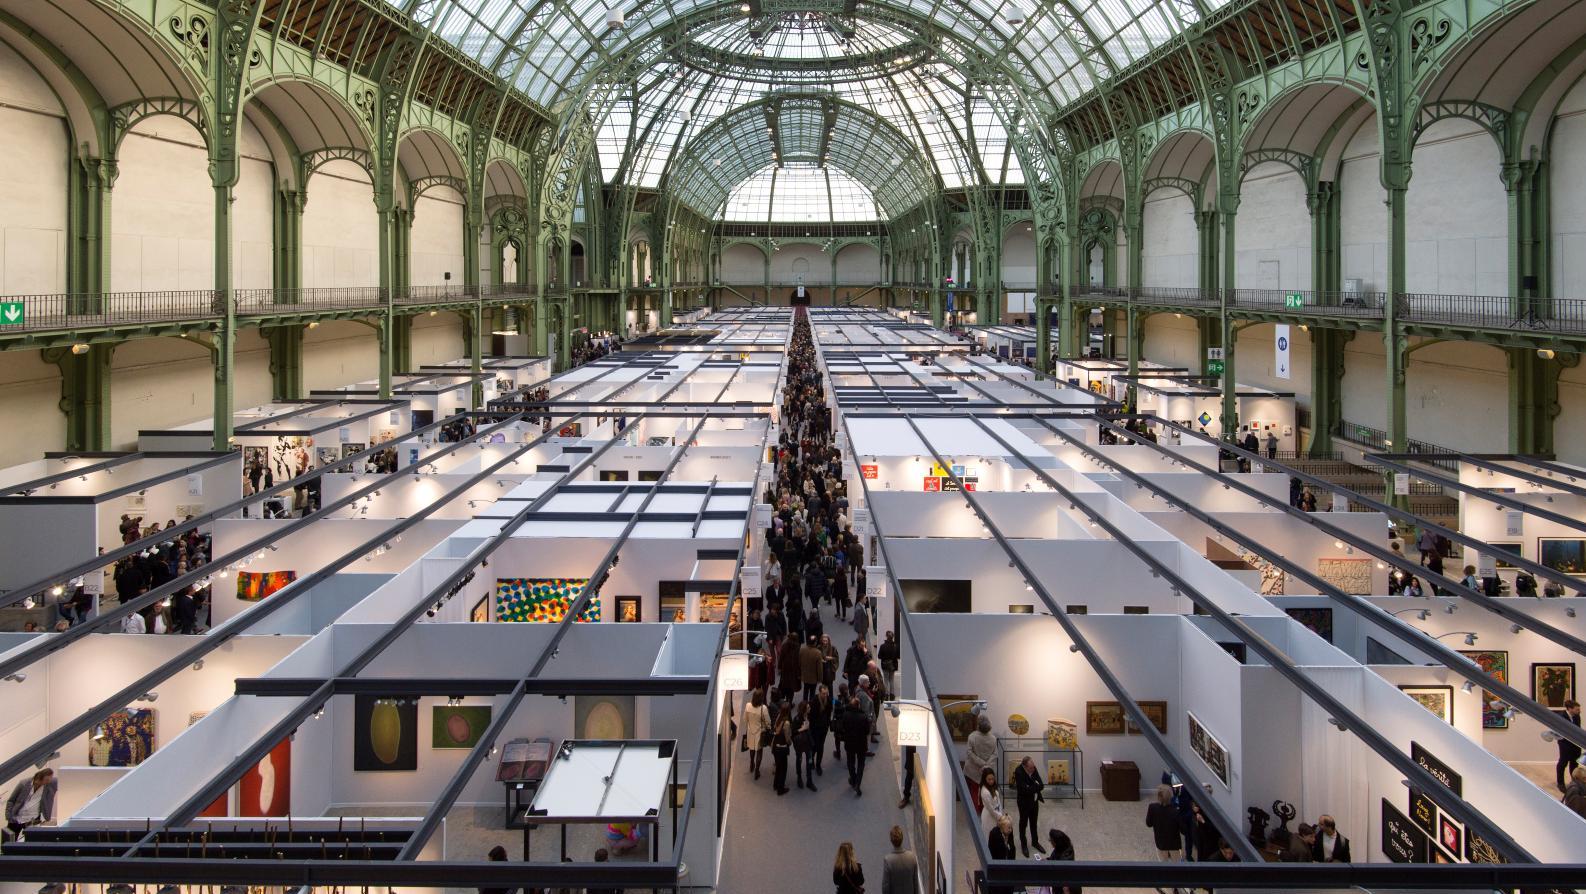 Event under the glass roof of the Grand Palais during Art Paris in 2019.© ART PARIS... COVID-19's Lessons